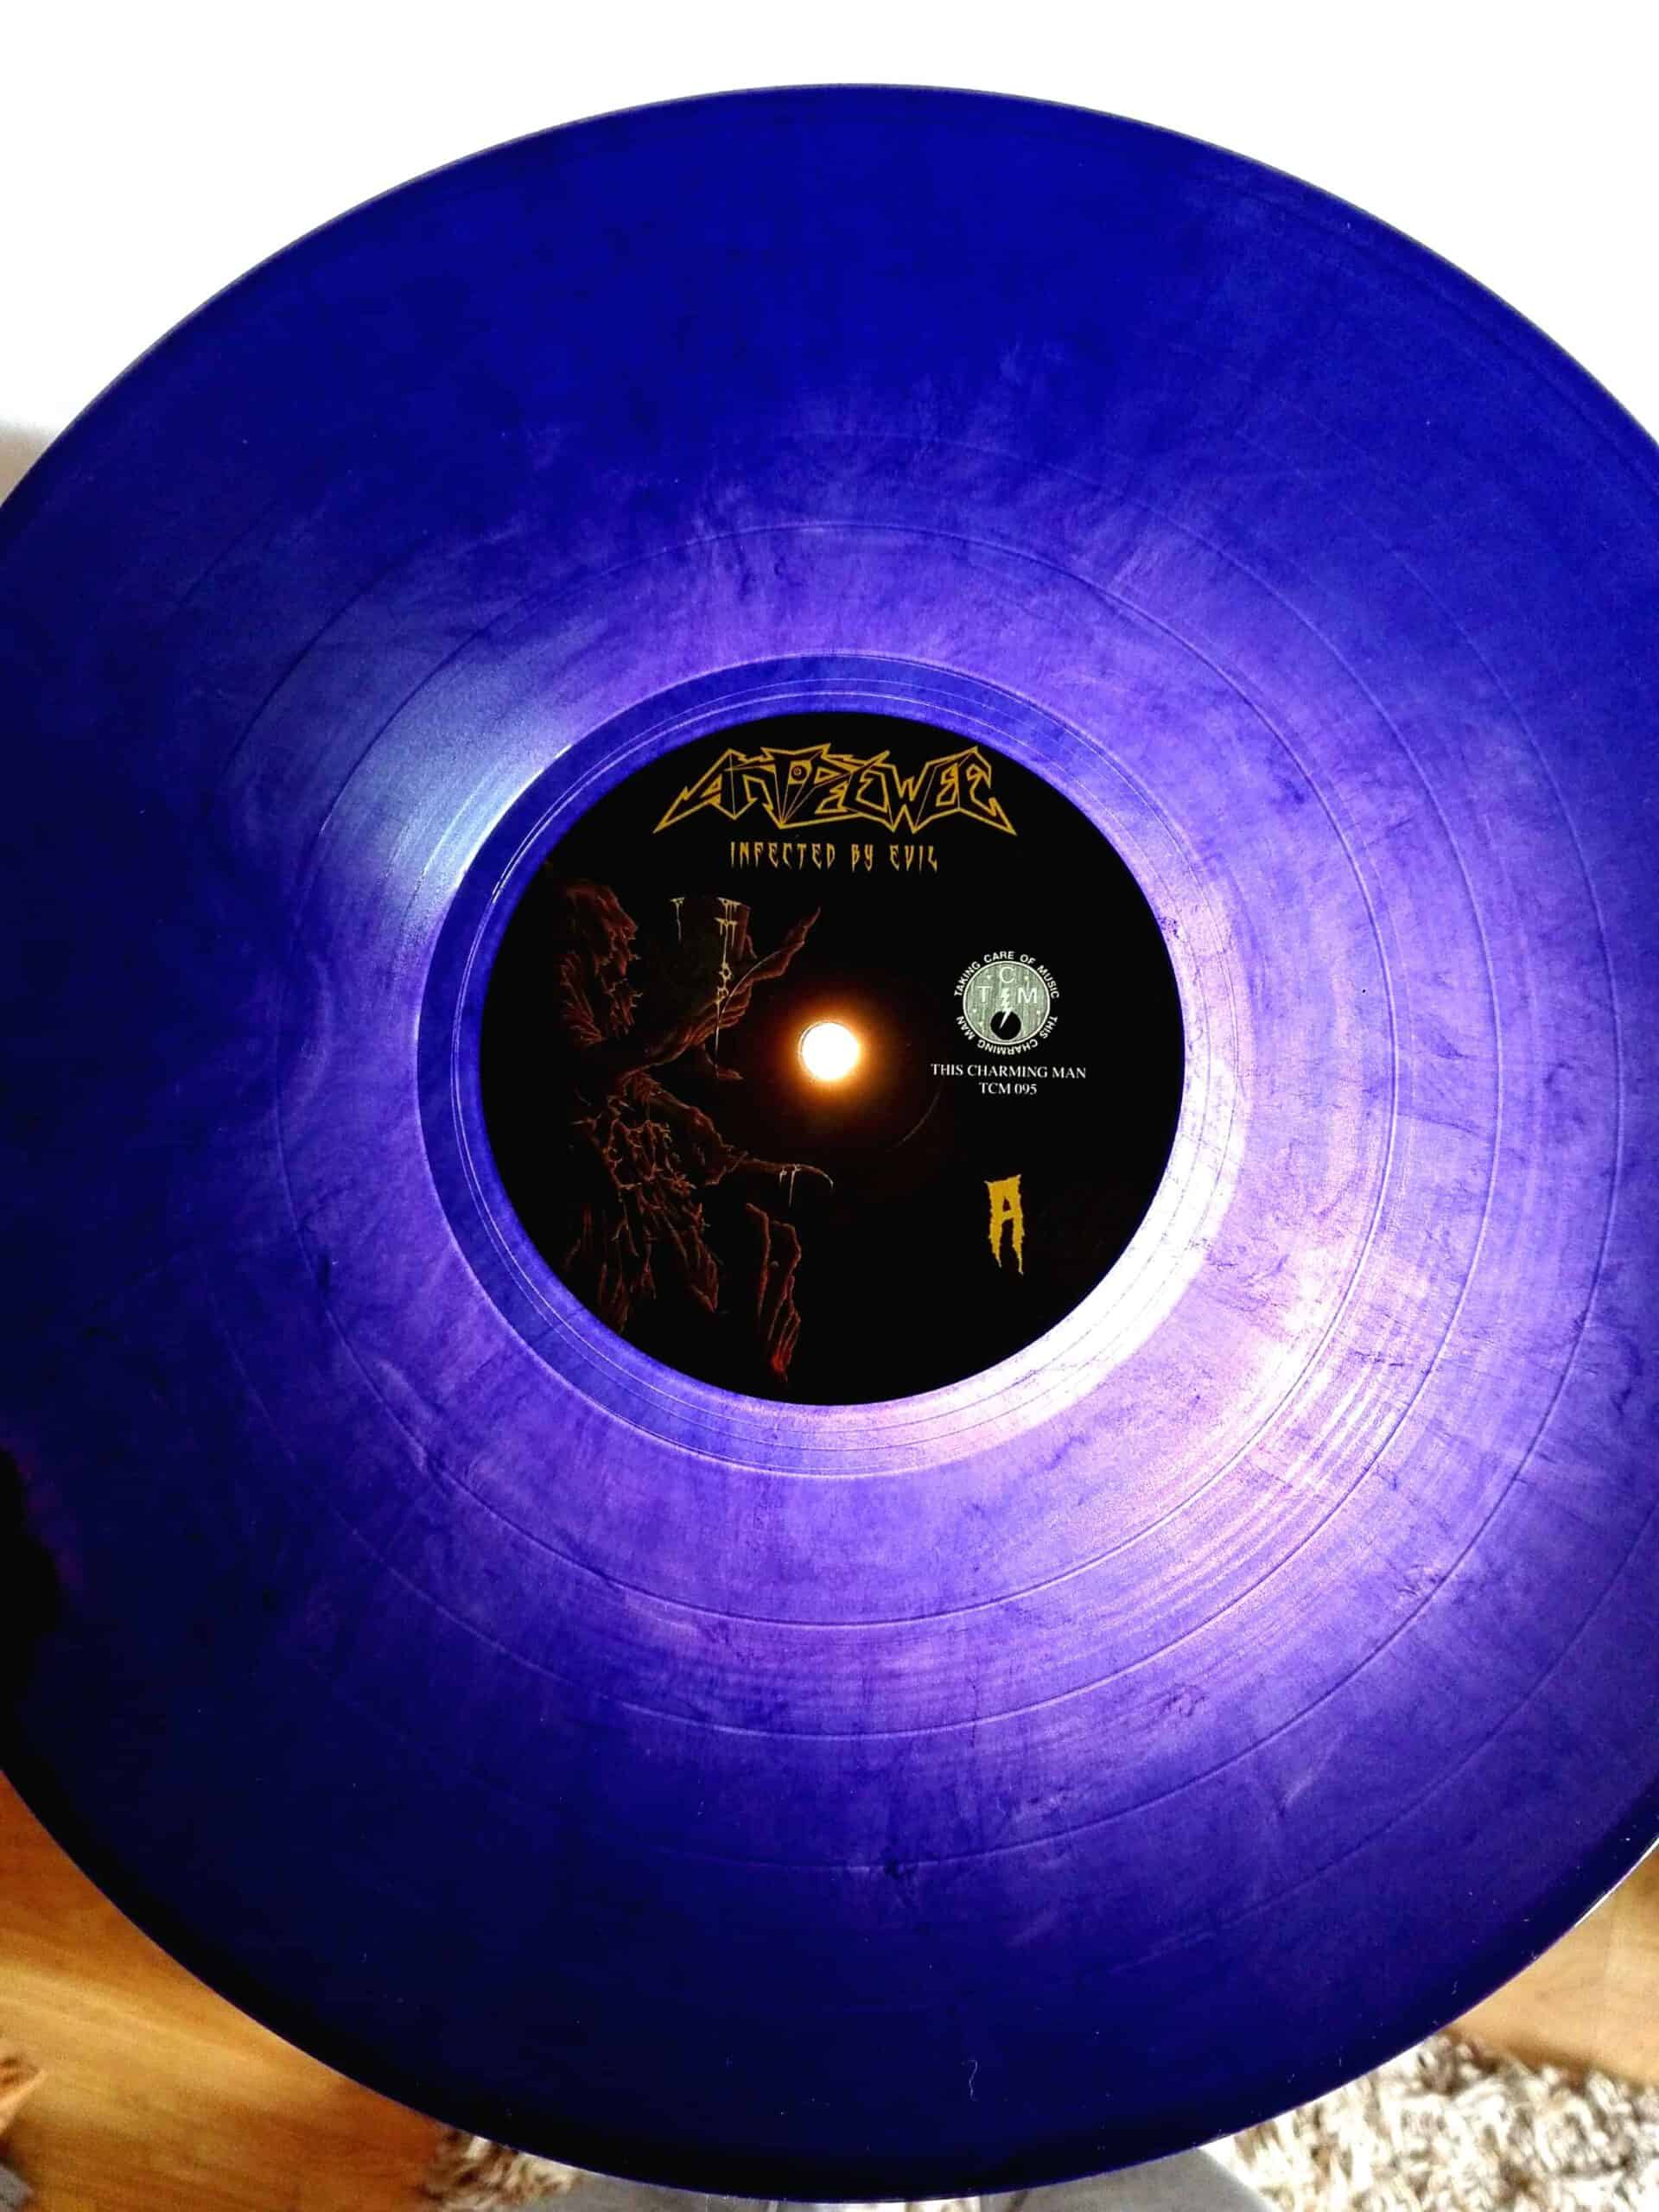 Antipeewee - Infected by Evil LP/CD 100x clear yellow, 400x clear purple w/ black smoke